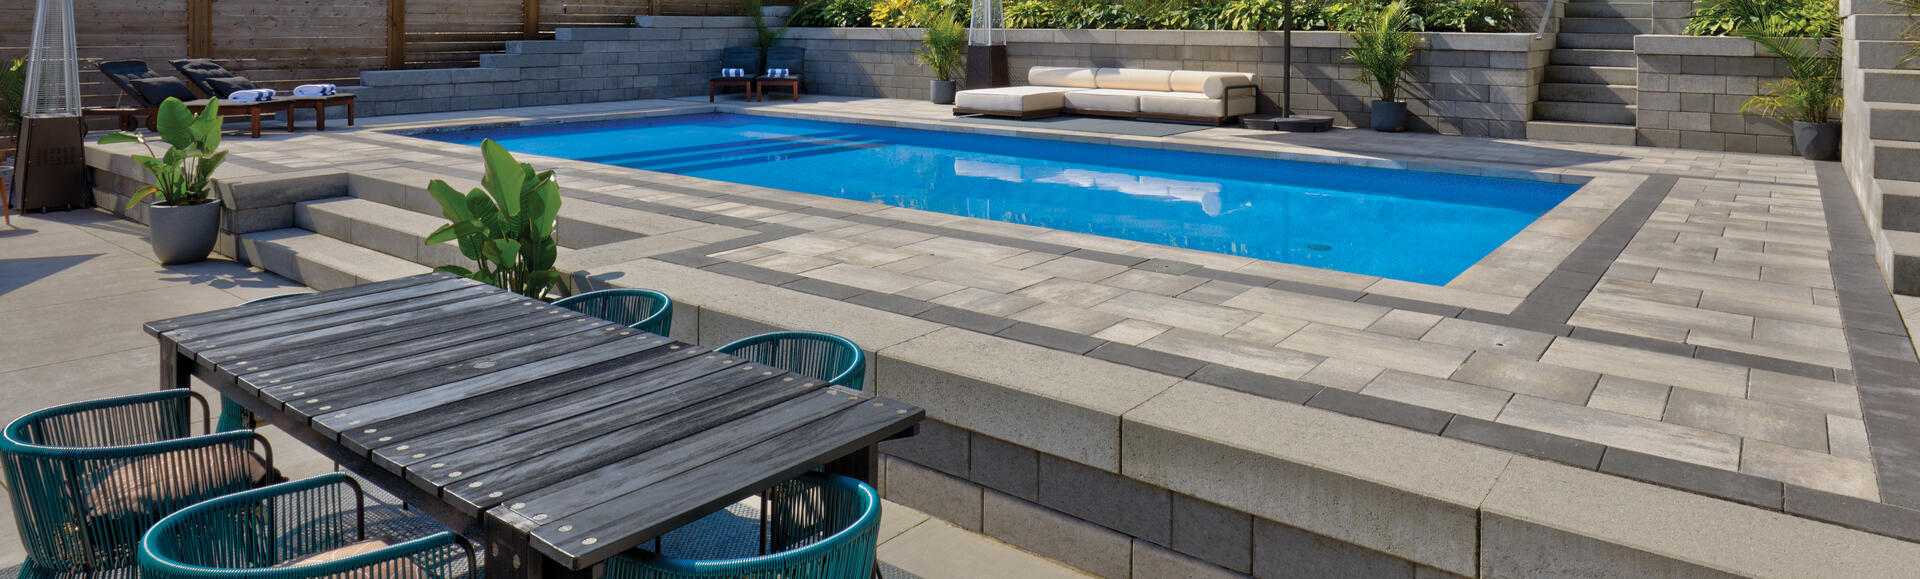 Patio with pool using Nueva Slab and Proterra Wall products from Oaks